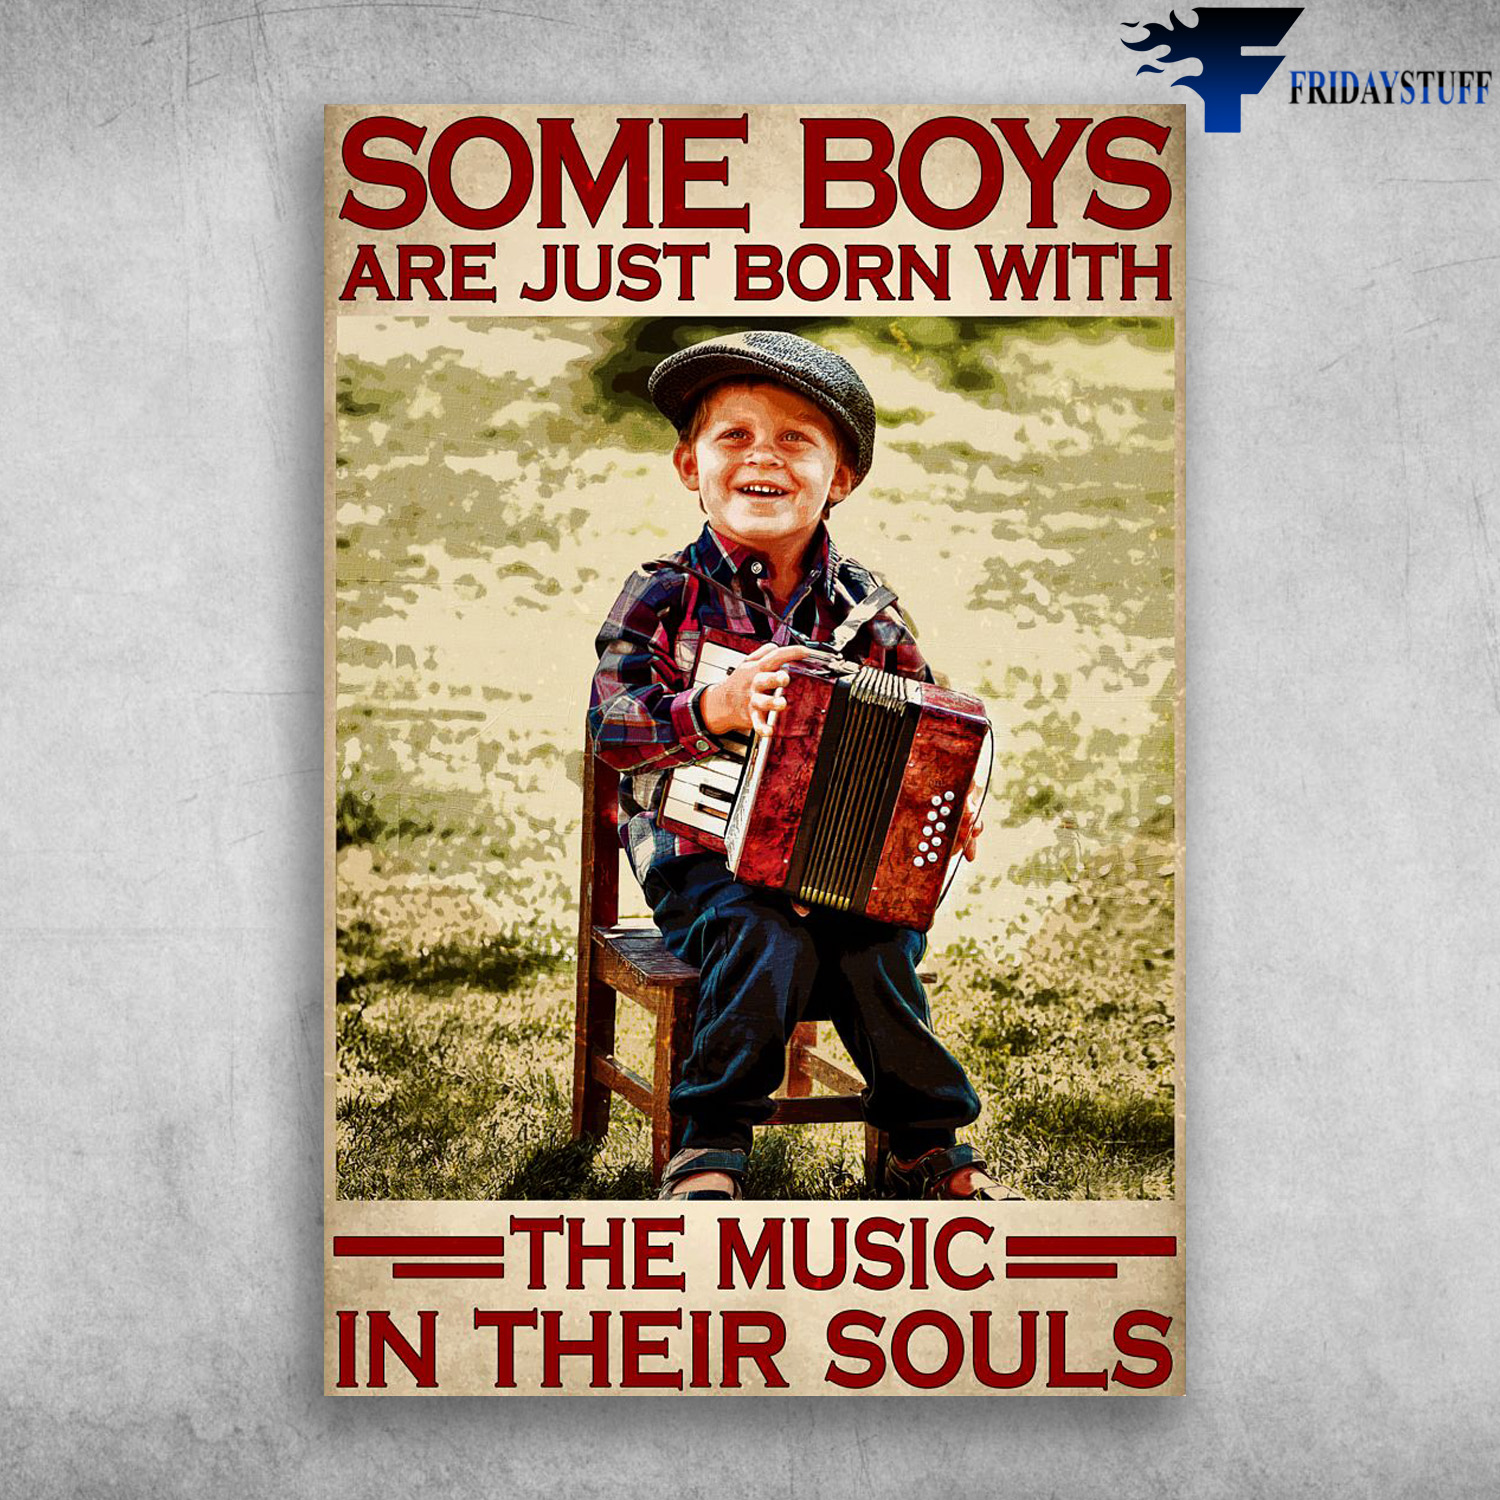 Boy Playing Accordion - Some Boys Are Just Born, With The Music, In Their Souls